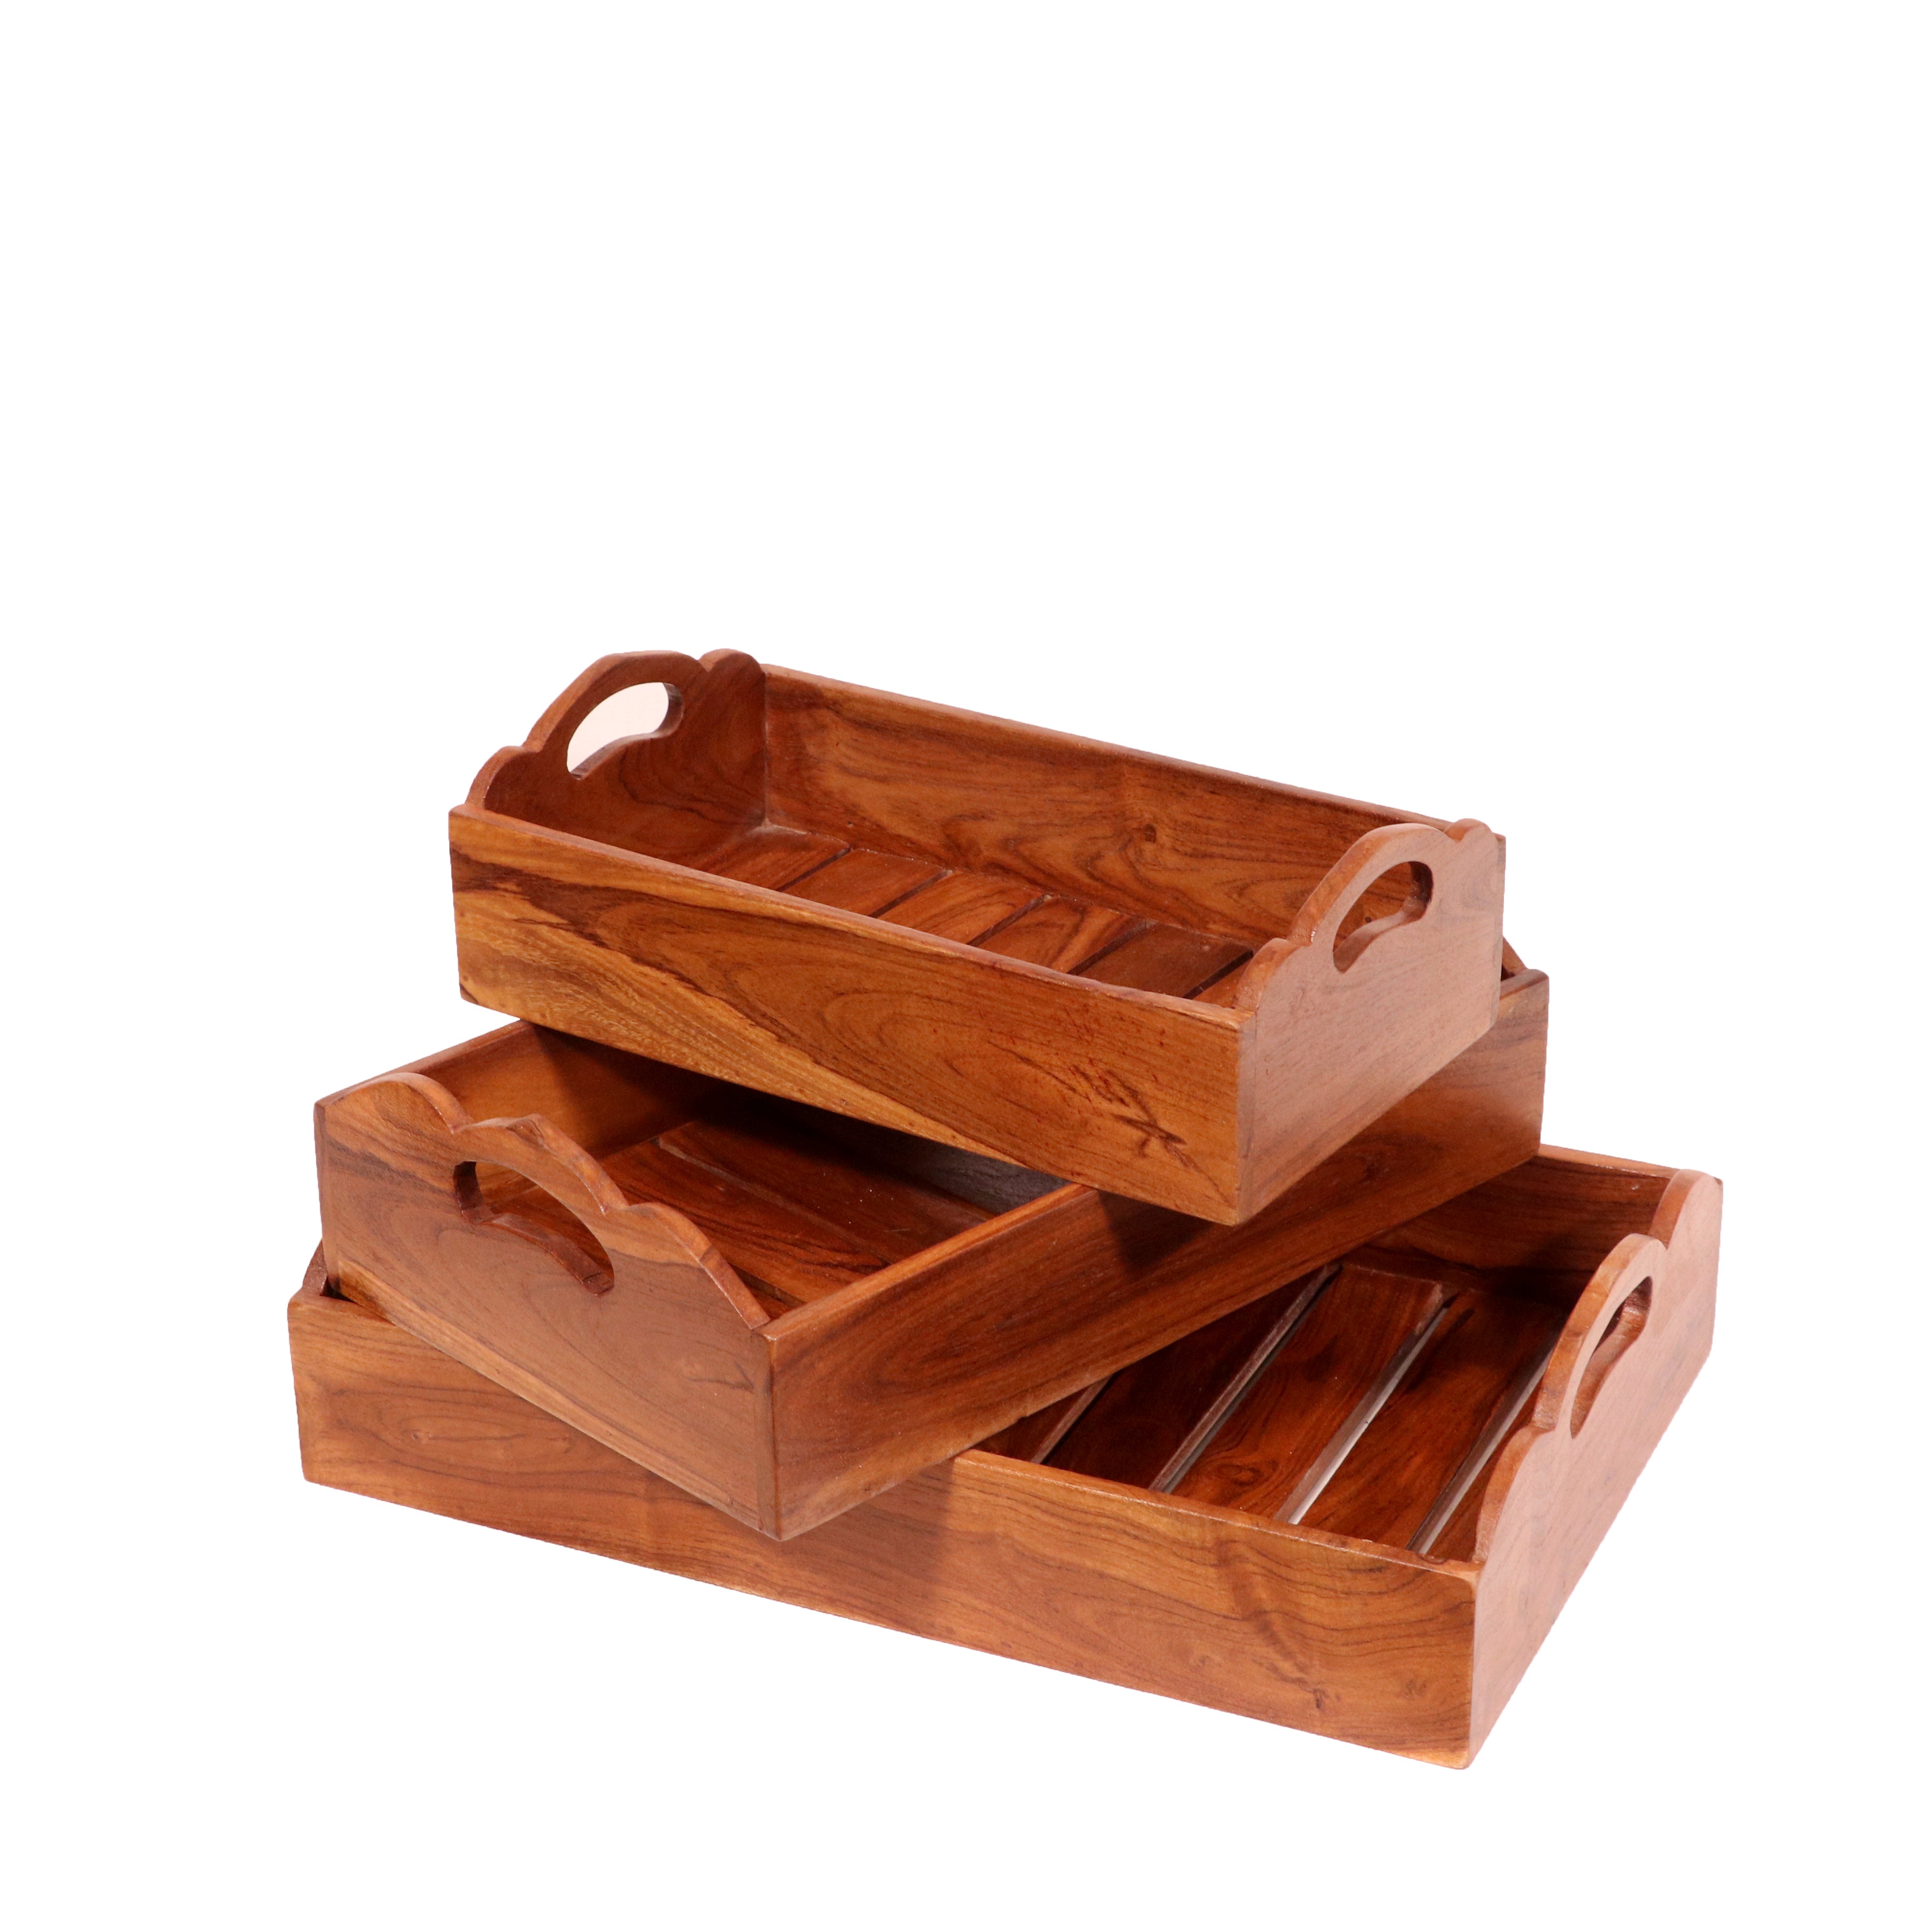 Curves and Stripes Tray - Set of 3 Natural Touch Tray